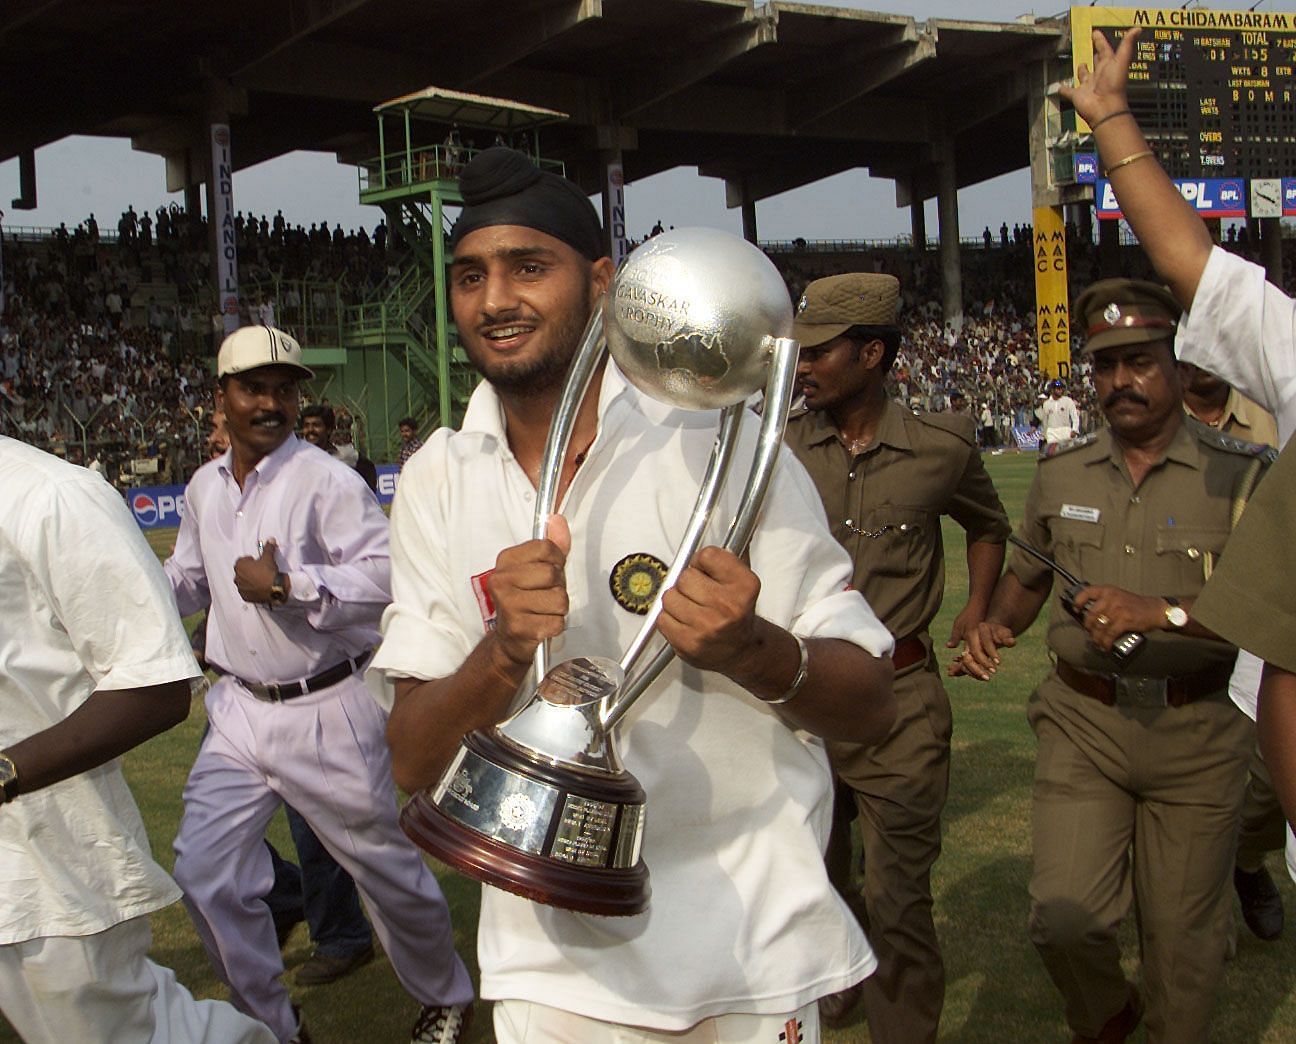 Harbhajan Singh took 32 wickets against Australia in three matches in 2001.